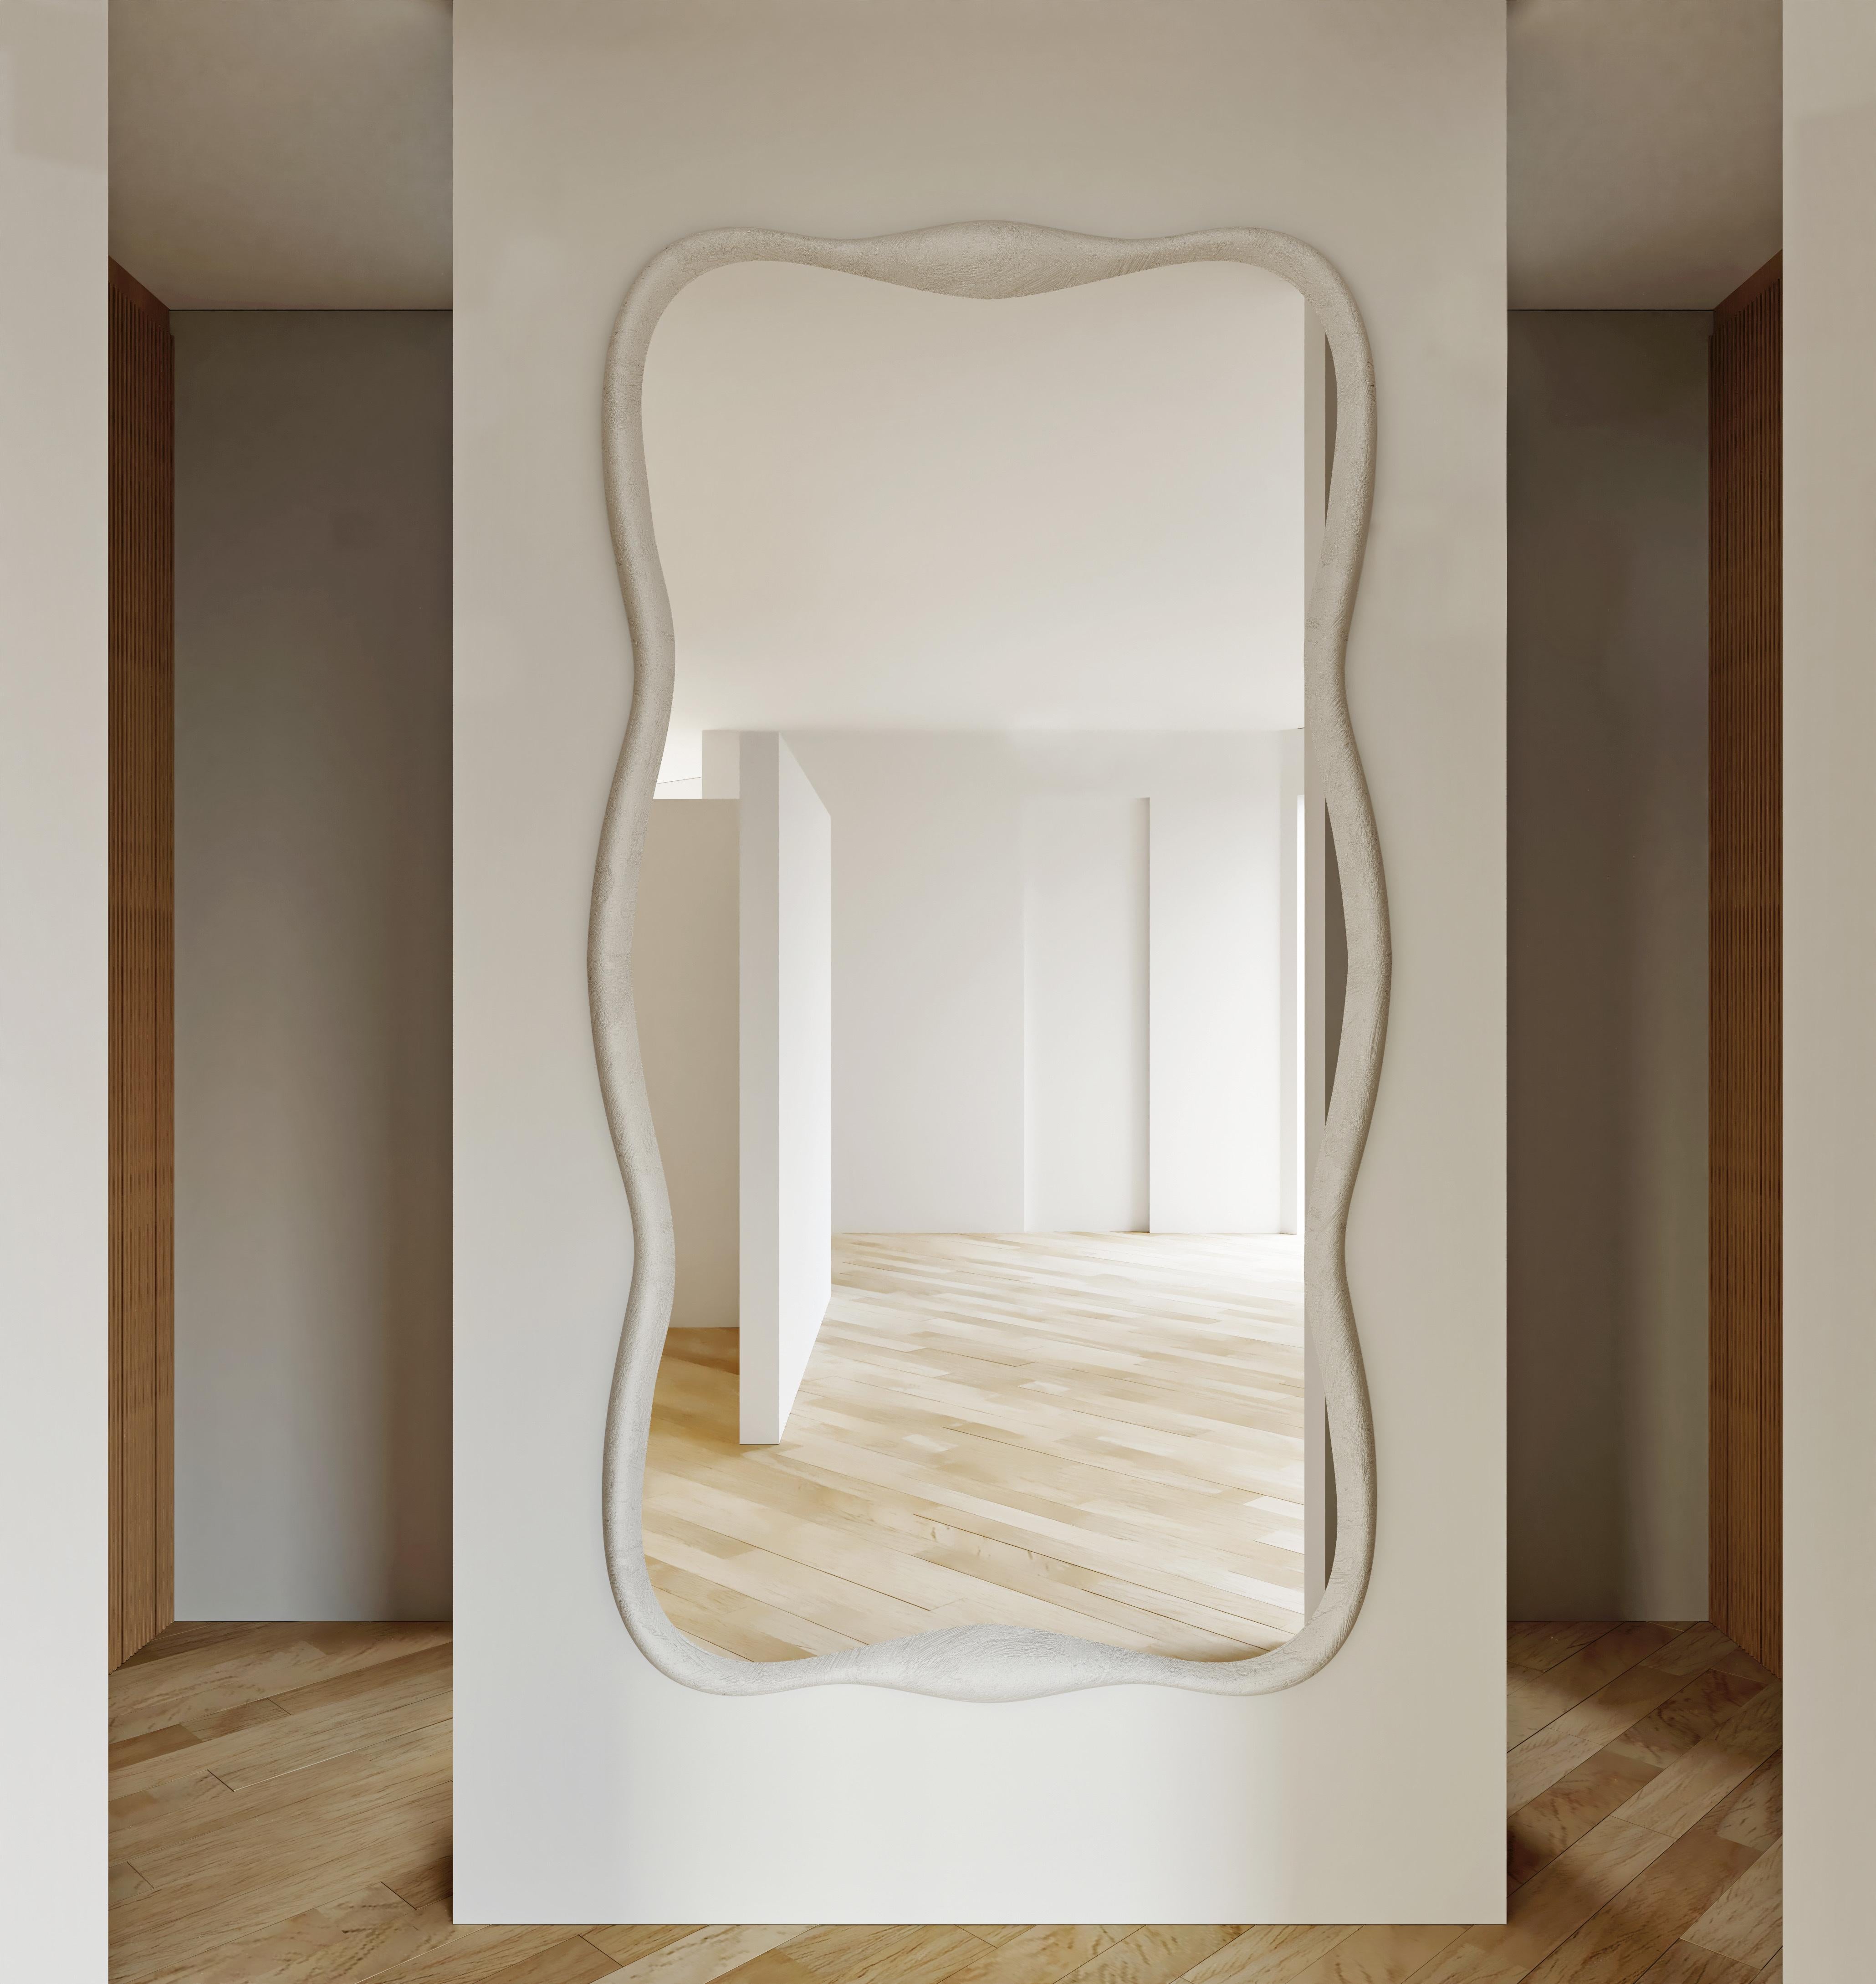 Plaster mirror with solid oak wood structure and finished in smooth plaster, dimensions 36